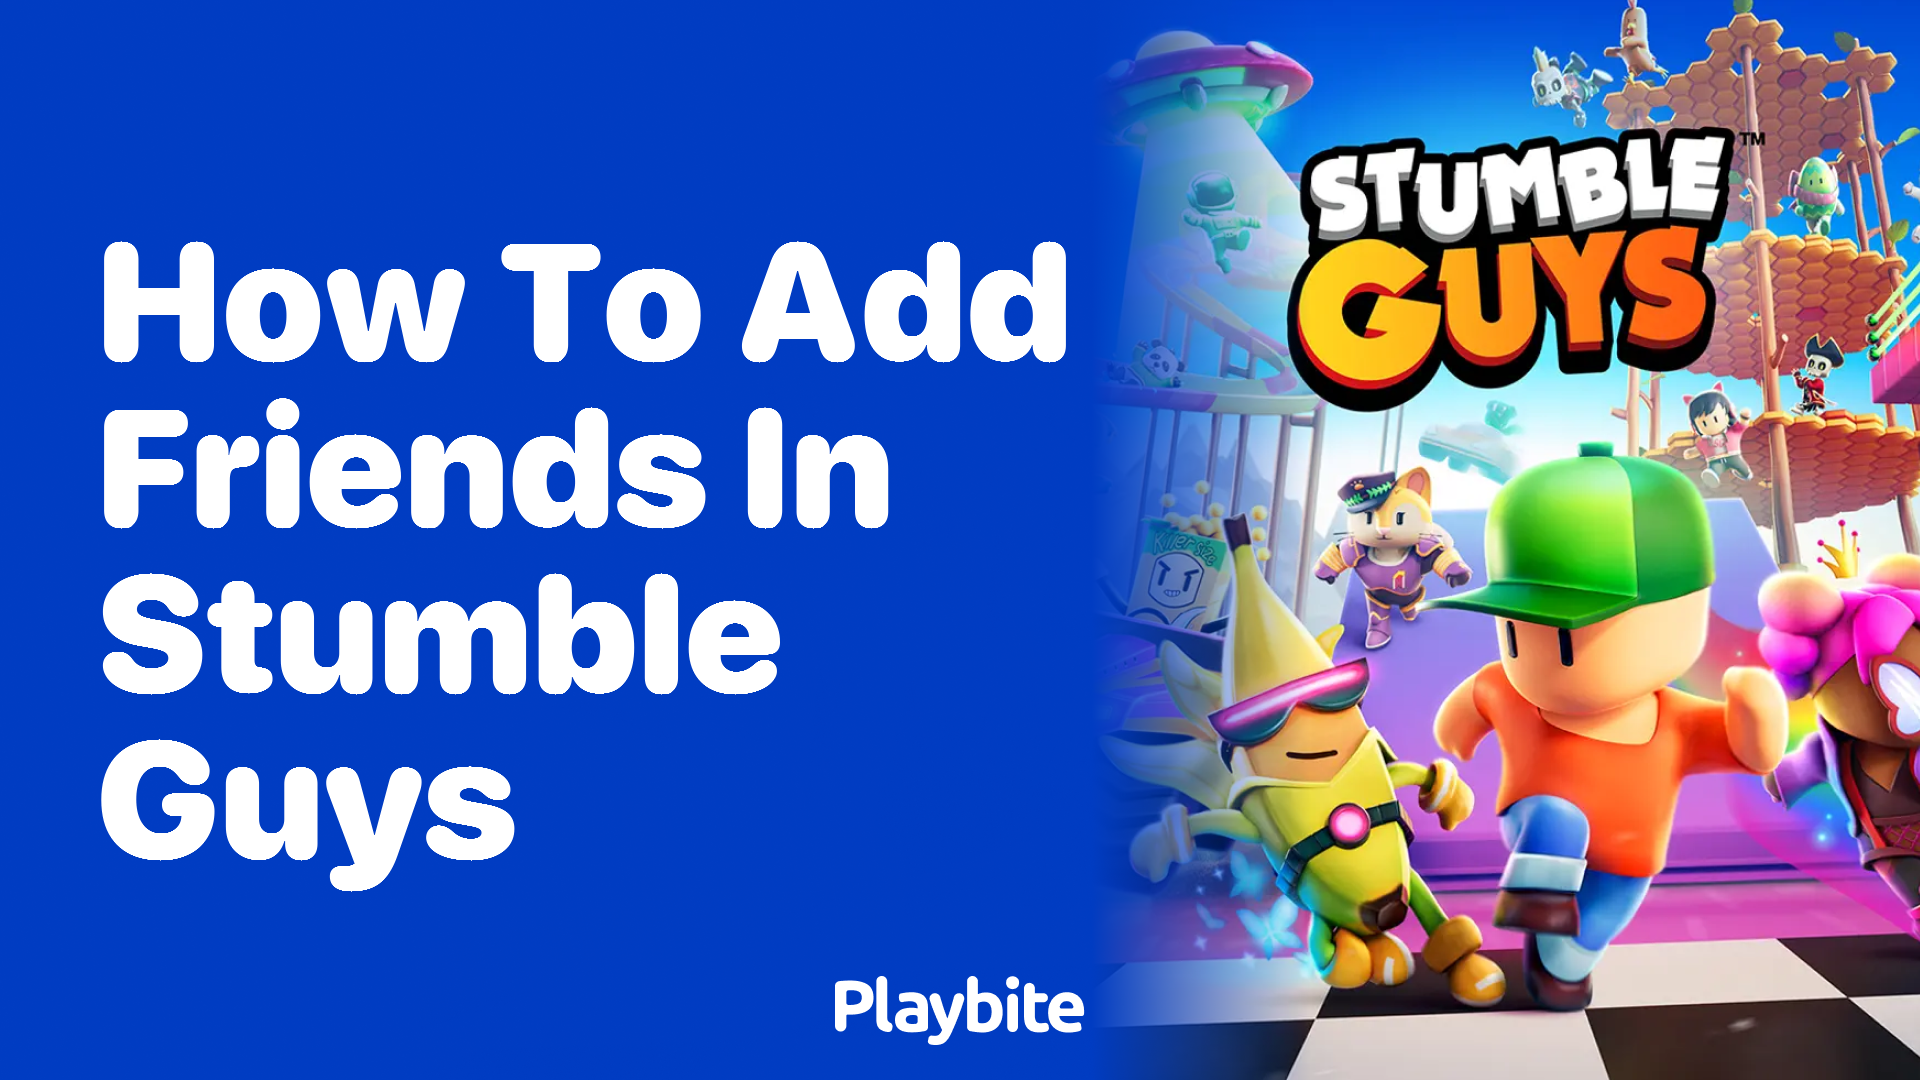 How to Add Friends in Stumble Guys